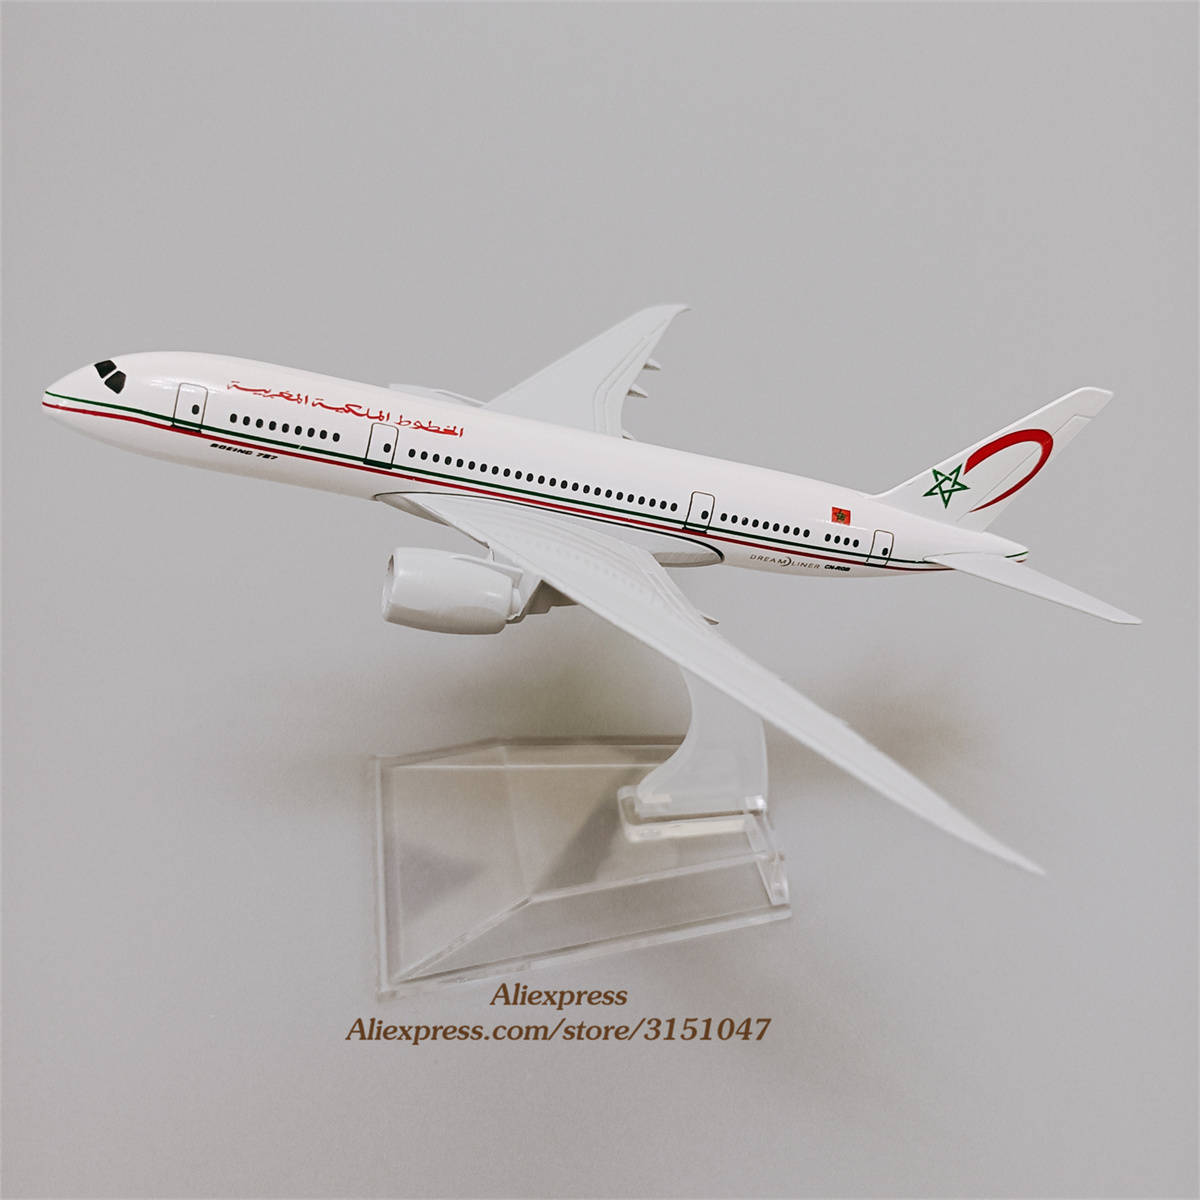 Royalair Maroc Miniature Toy In Italian Can Be Translated As 